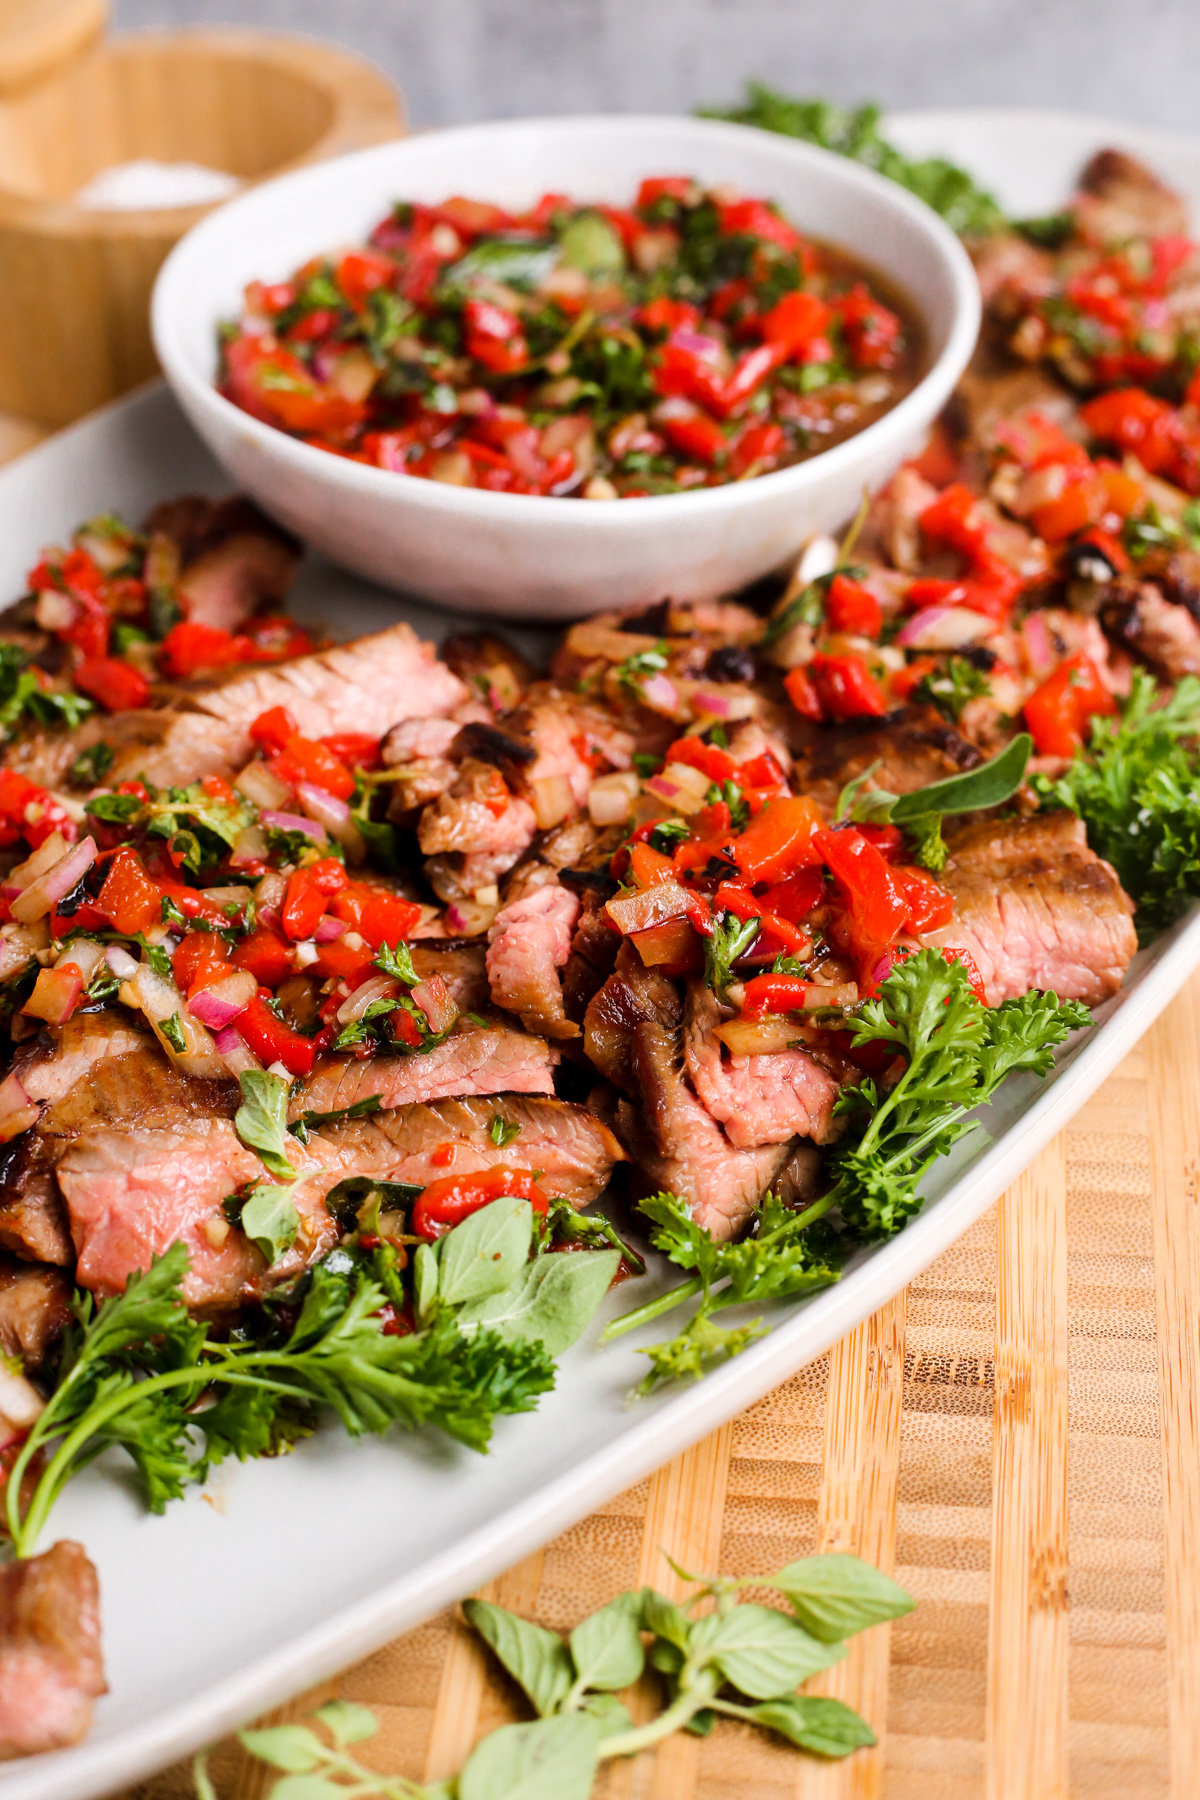 Side view of seared skirt steak, sliced against the grain, on a serving platter garnished with green herbs and a roasted red pepper relish